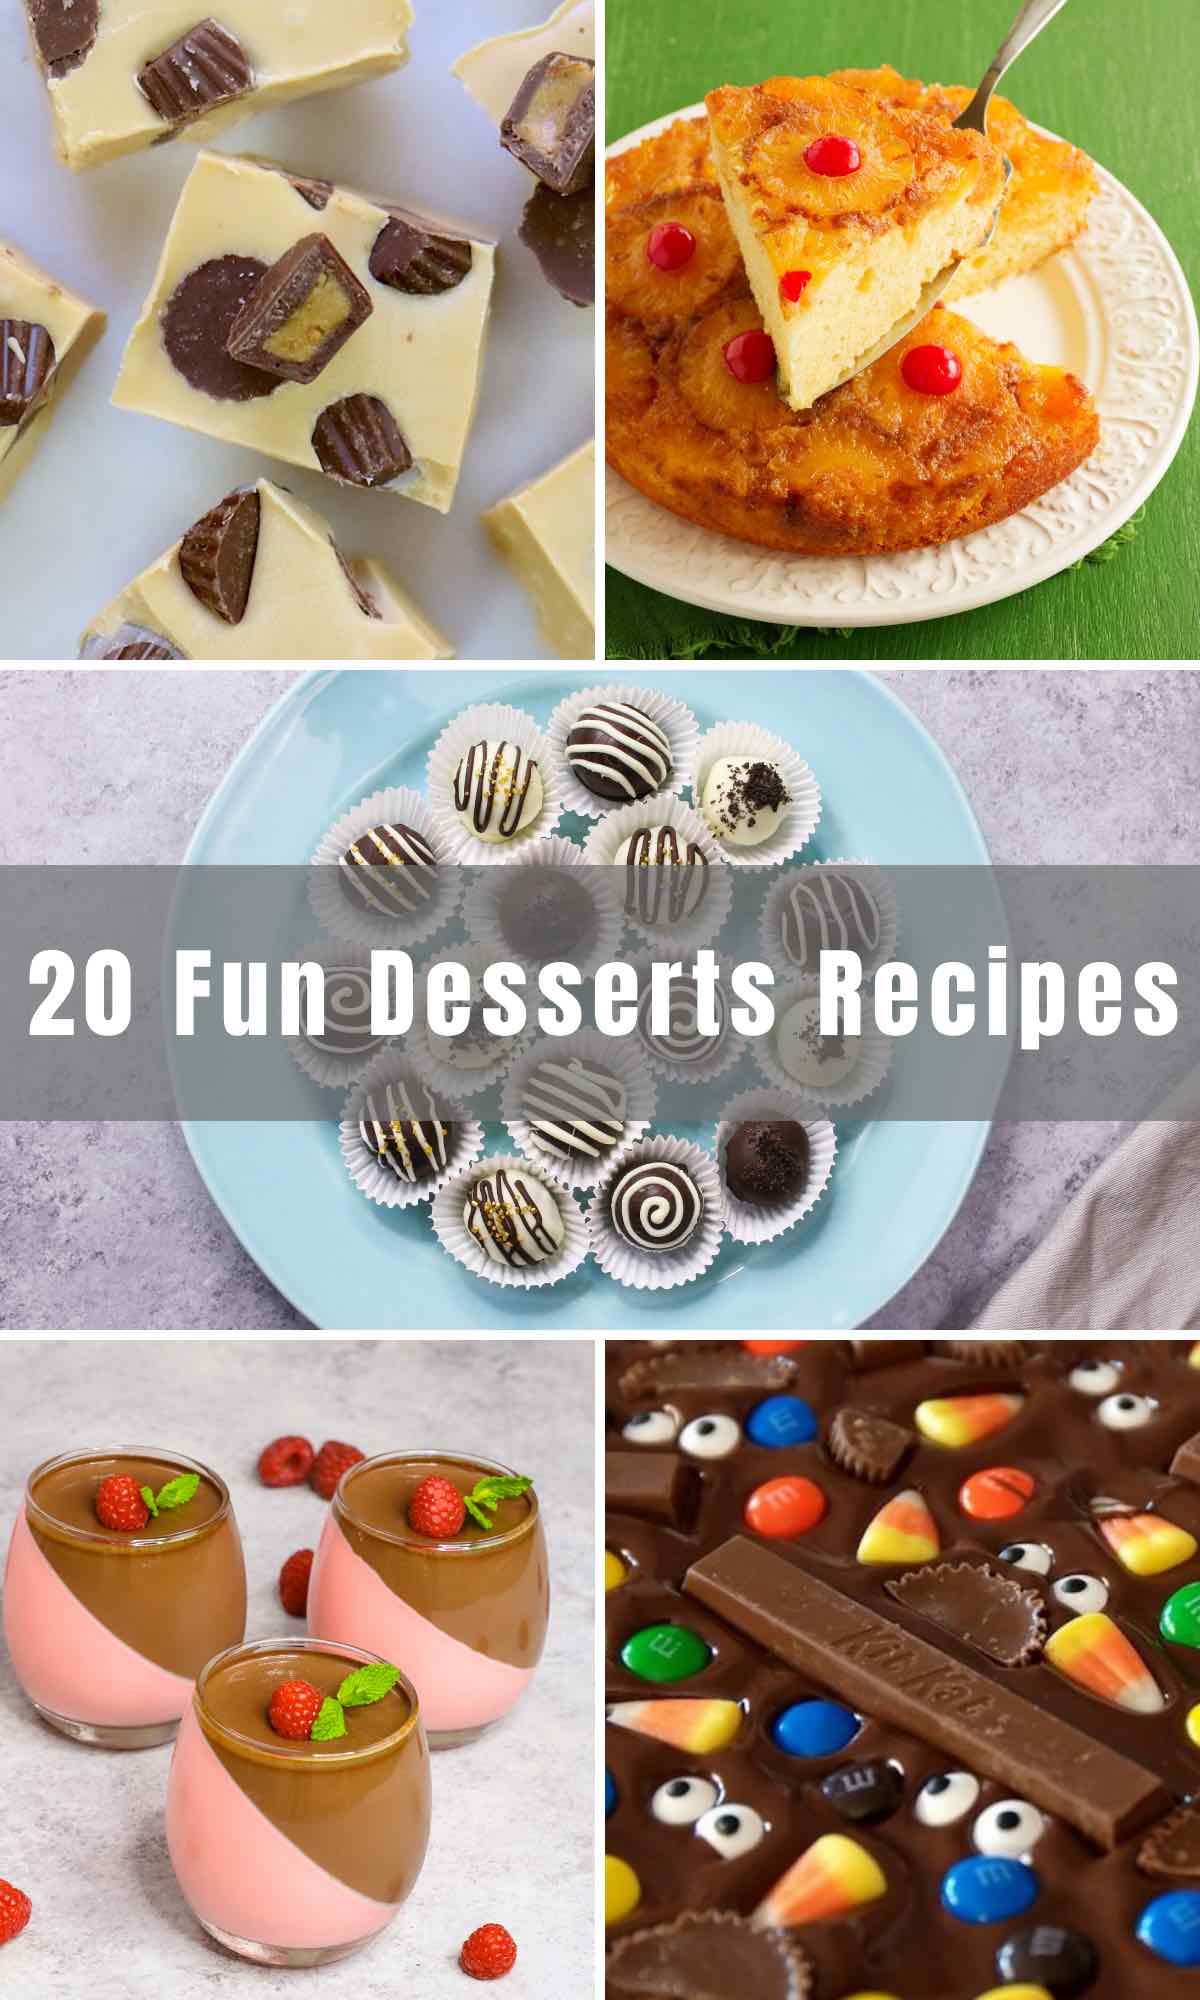 Is there anything more enjoyable than making gourmet treats from scratch at home? Below you will find 20 Fun Desserts to Make that cover no-bake, holidays, and easy ones that you can make with kids.